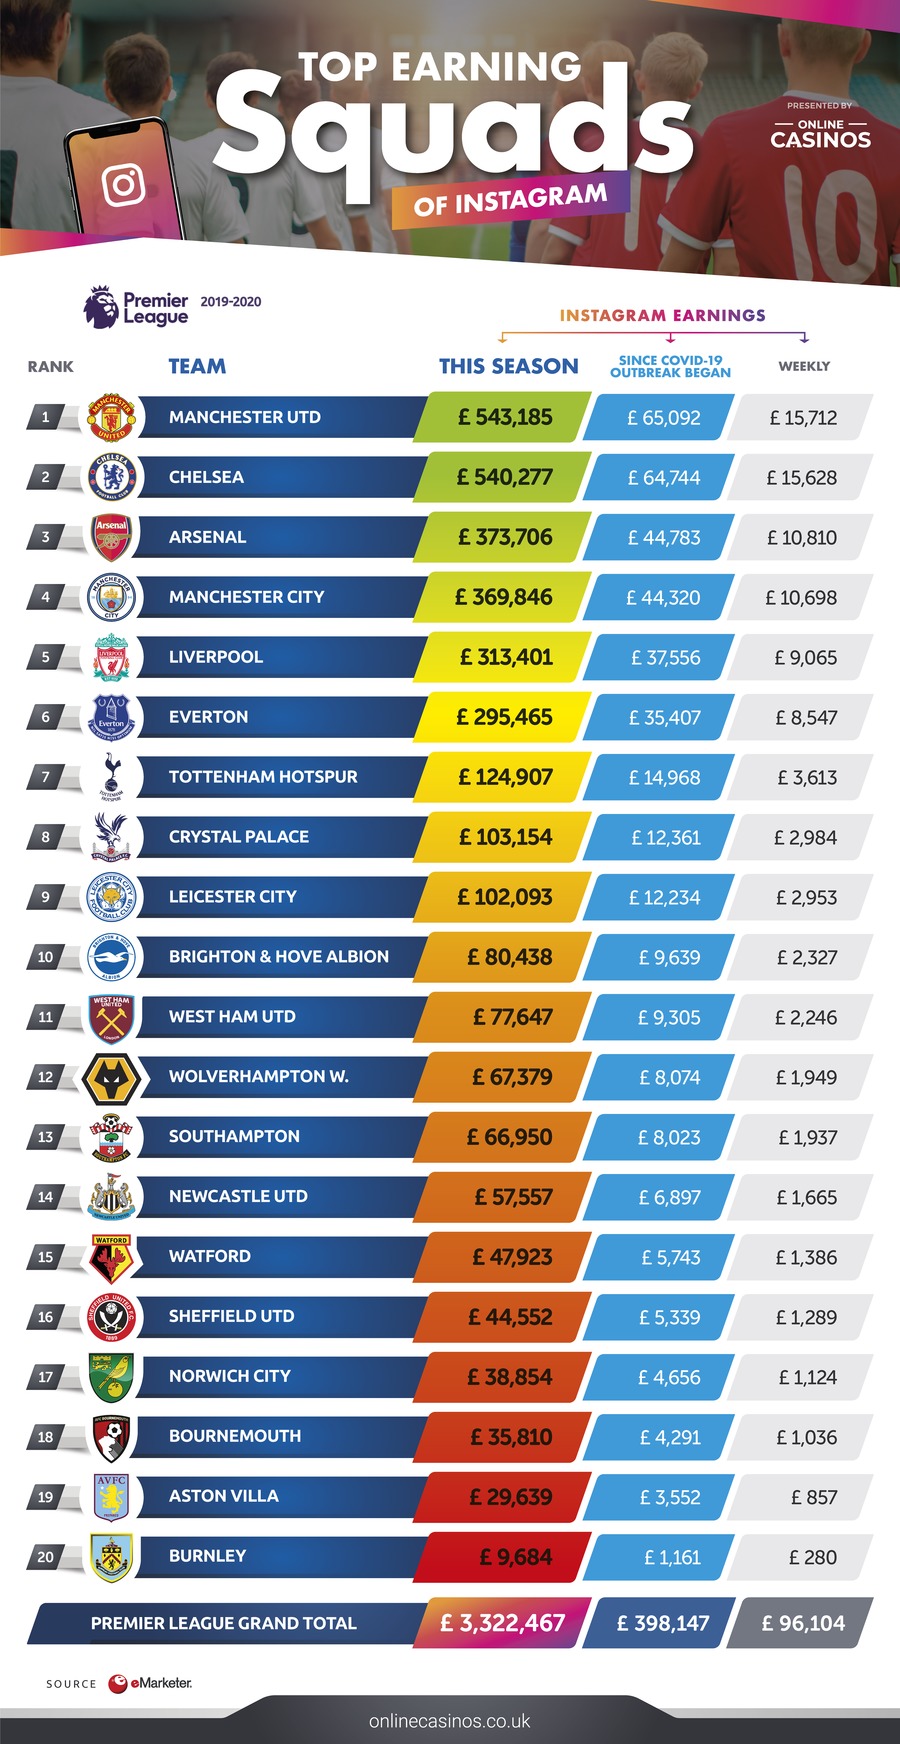 Top Earning Squads of Instagram